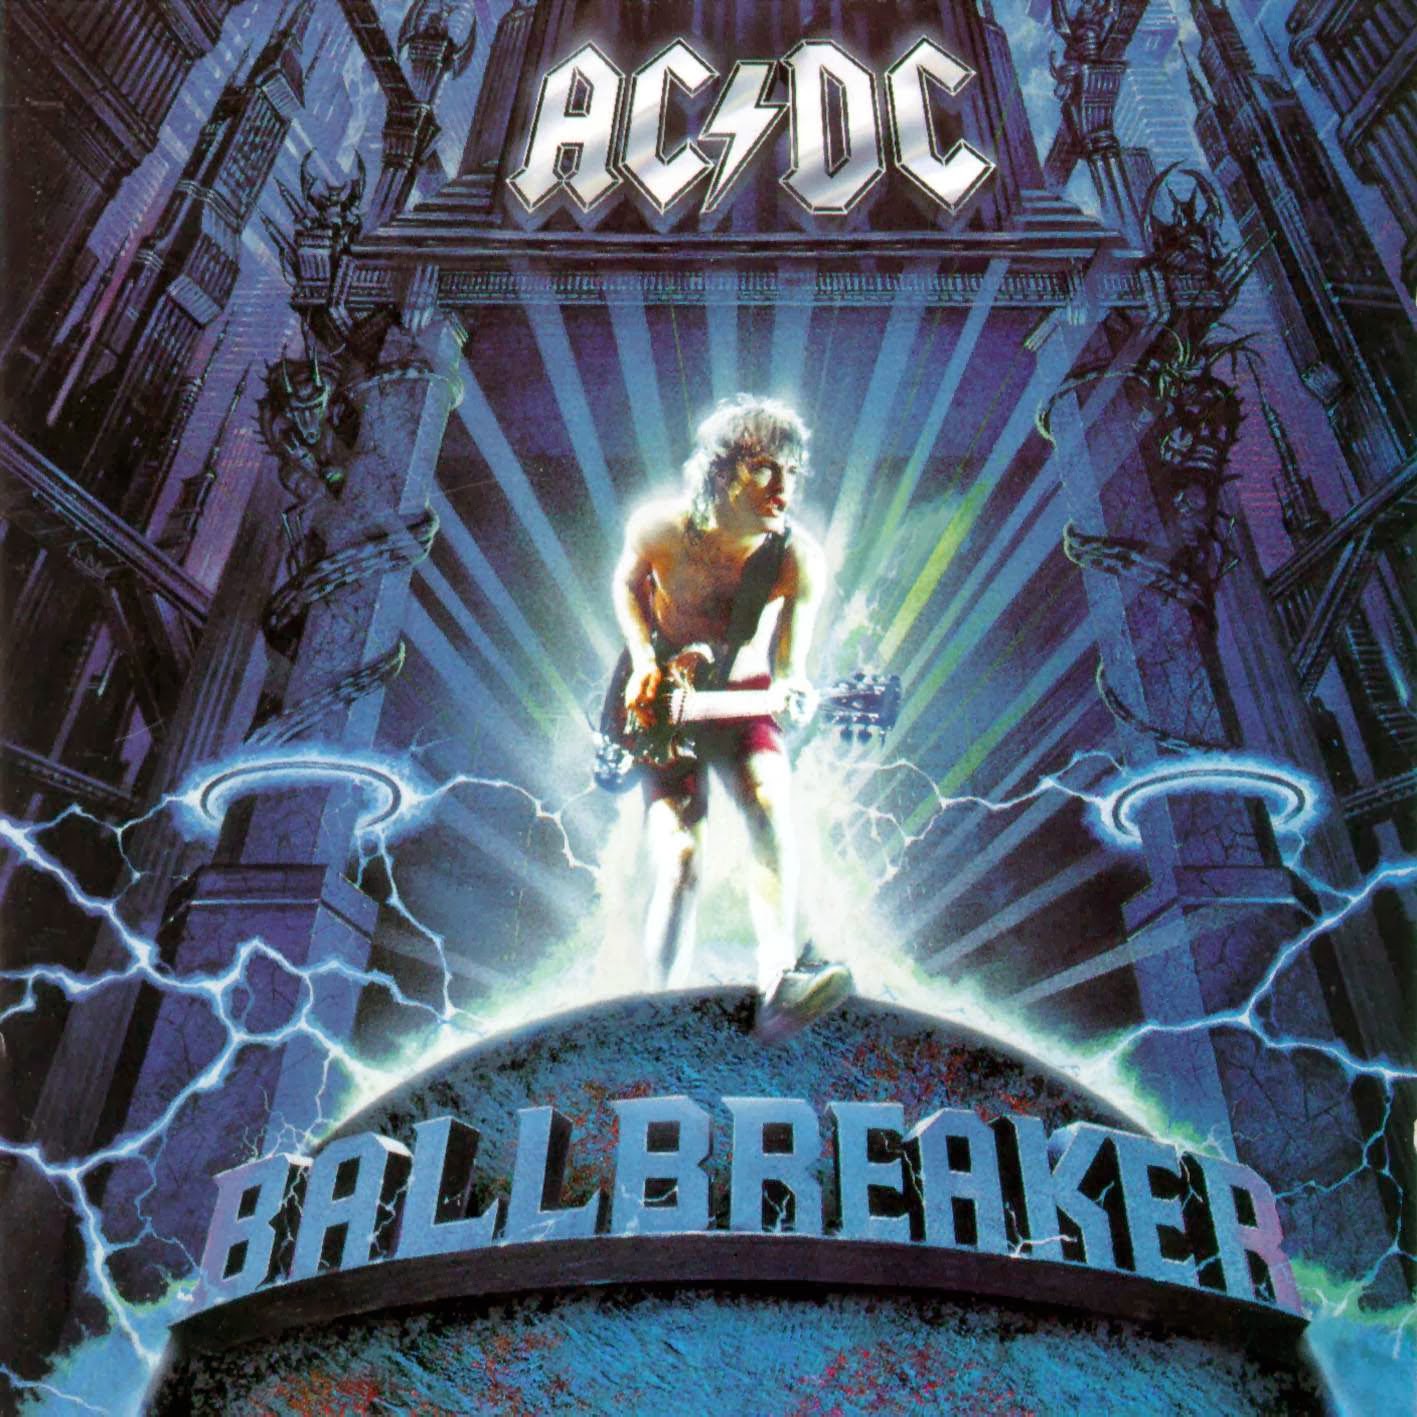 acdc ballbreaker tour opening act